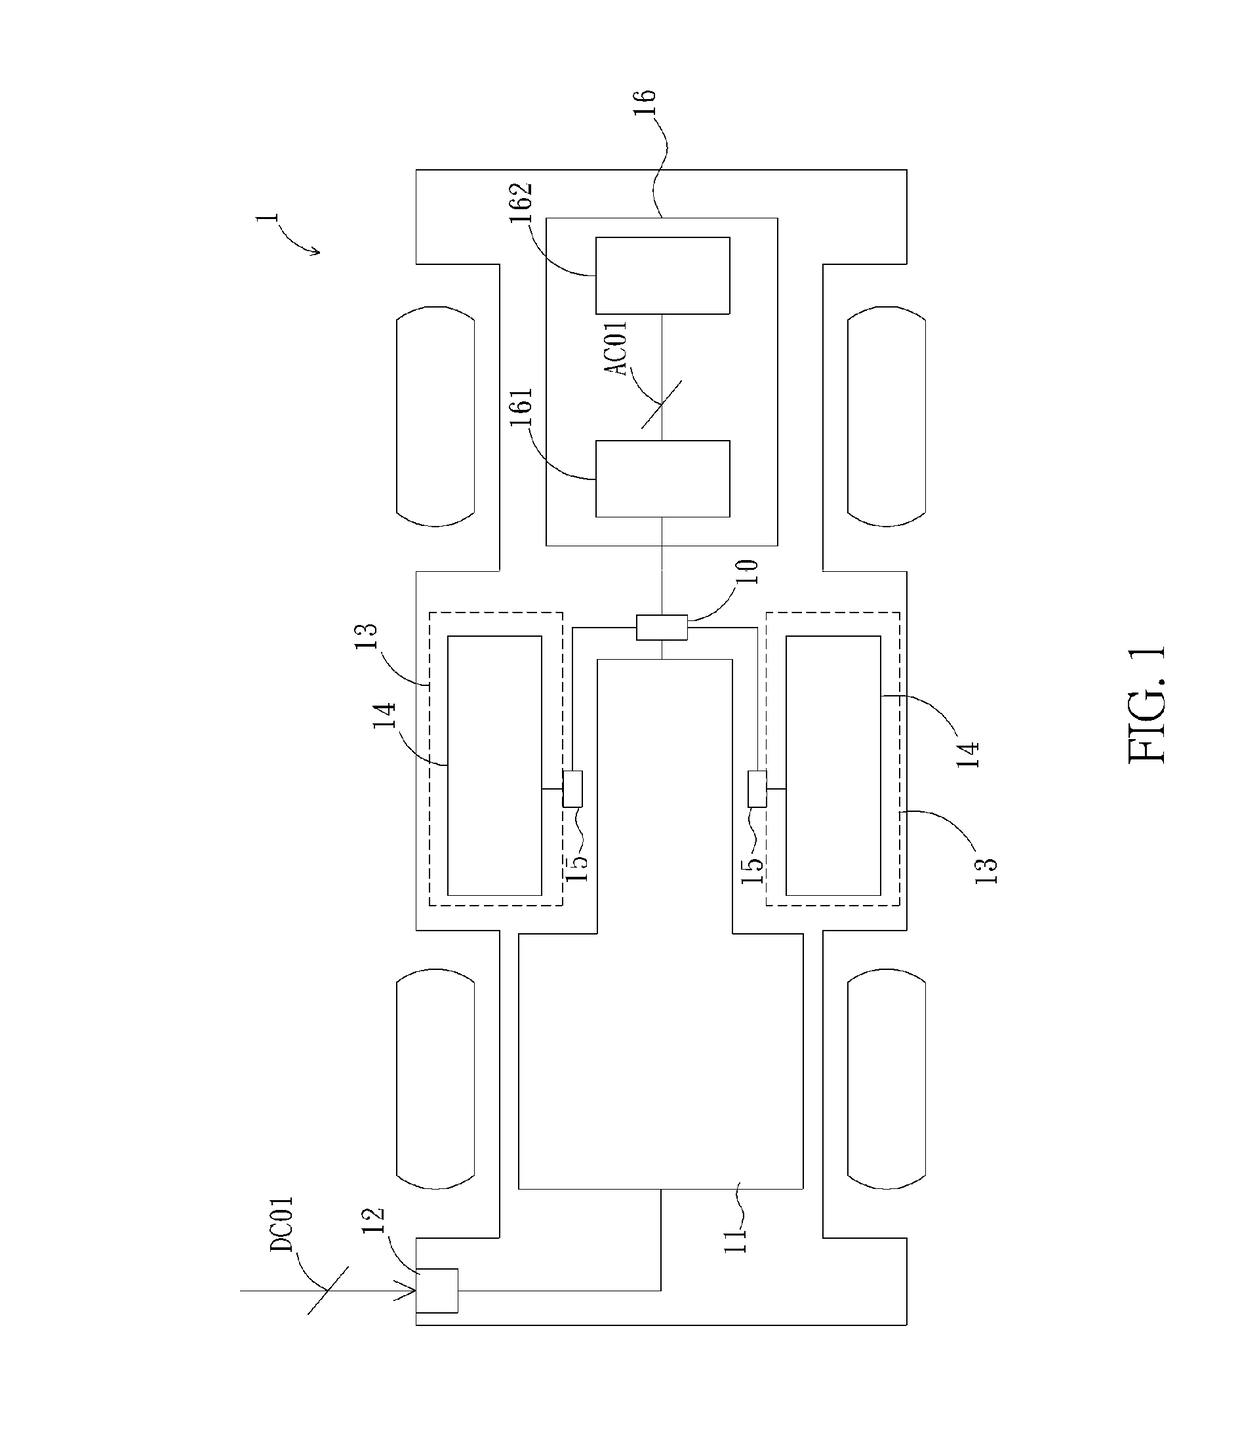 Electric Vehicle, Power Supply Station, and Power Maintaining Method for Electric Vehicle